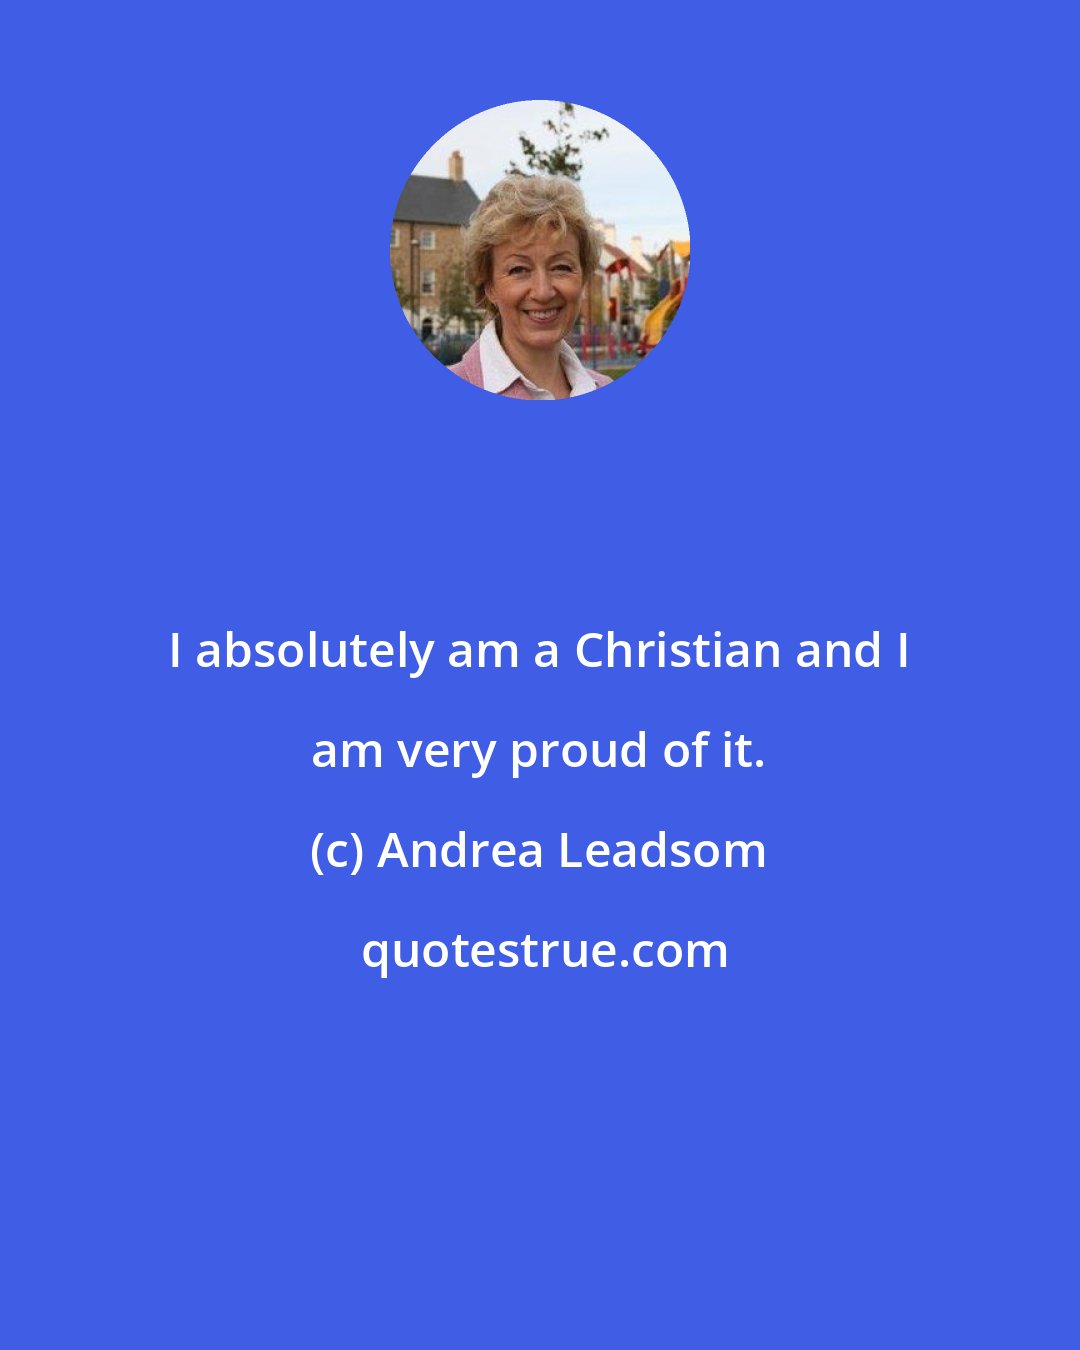 Andrea Leadsom: I absolutely am a Christian and I am very proud of it.